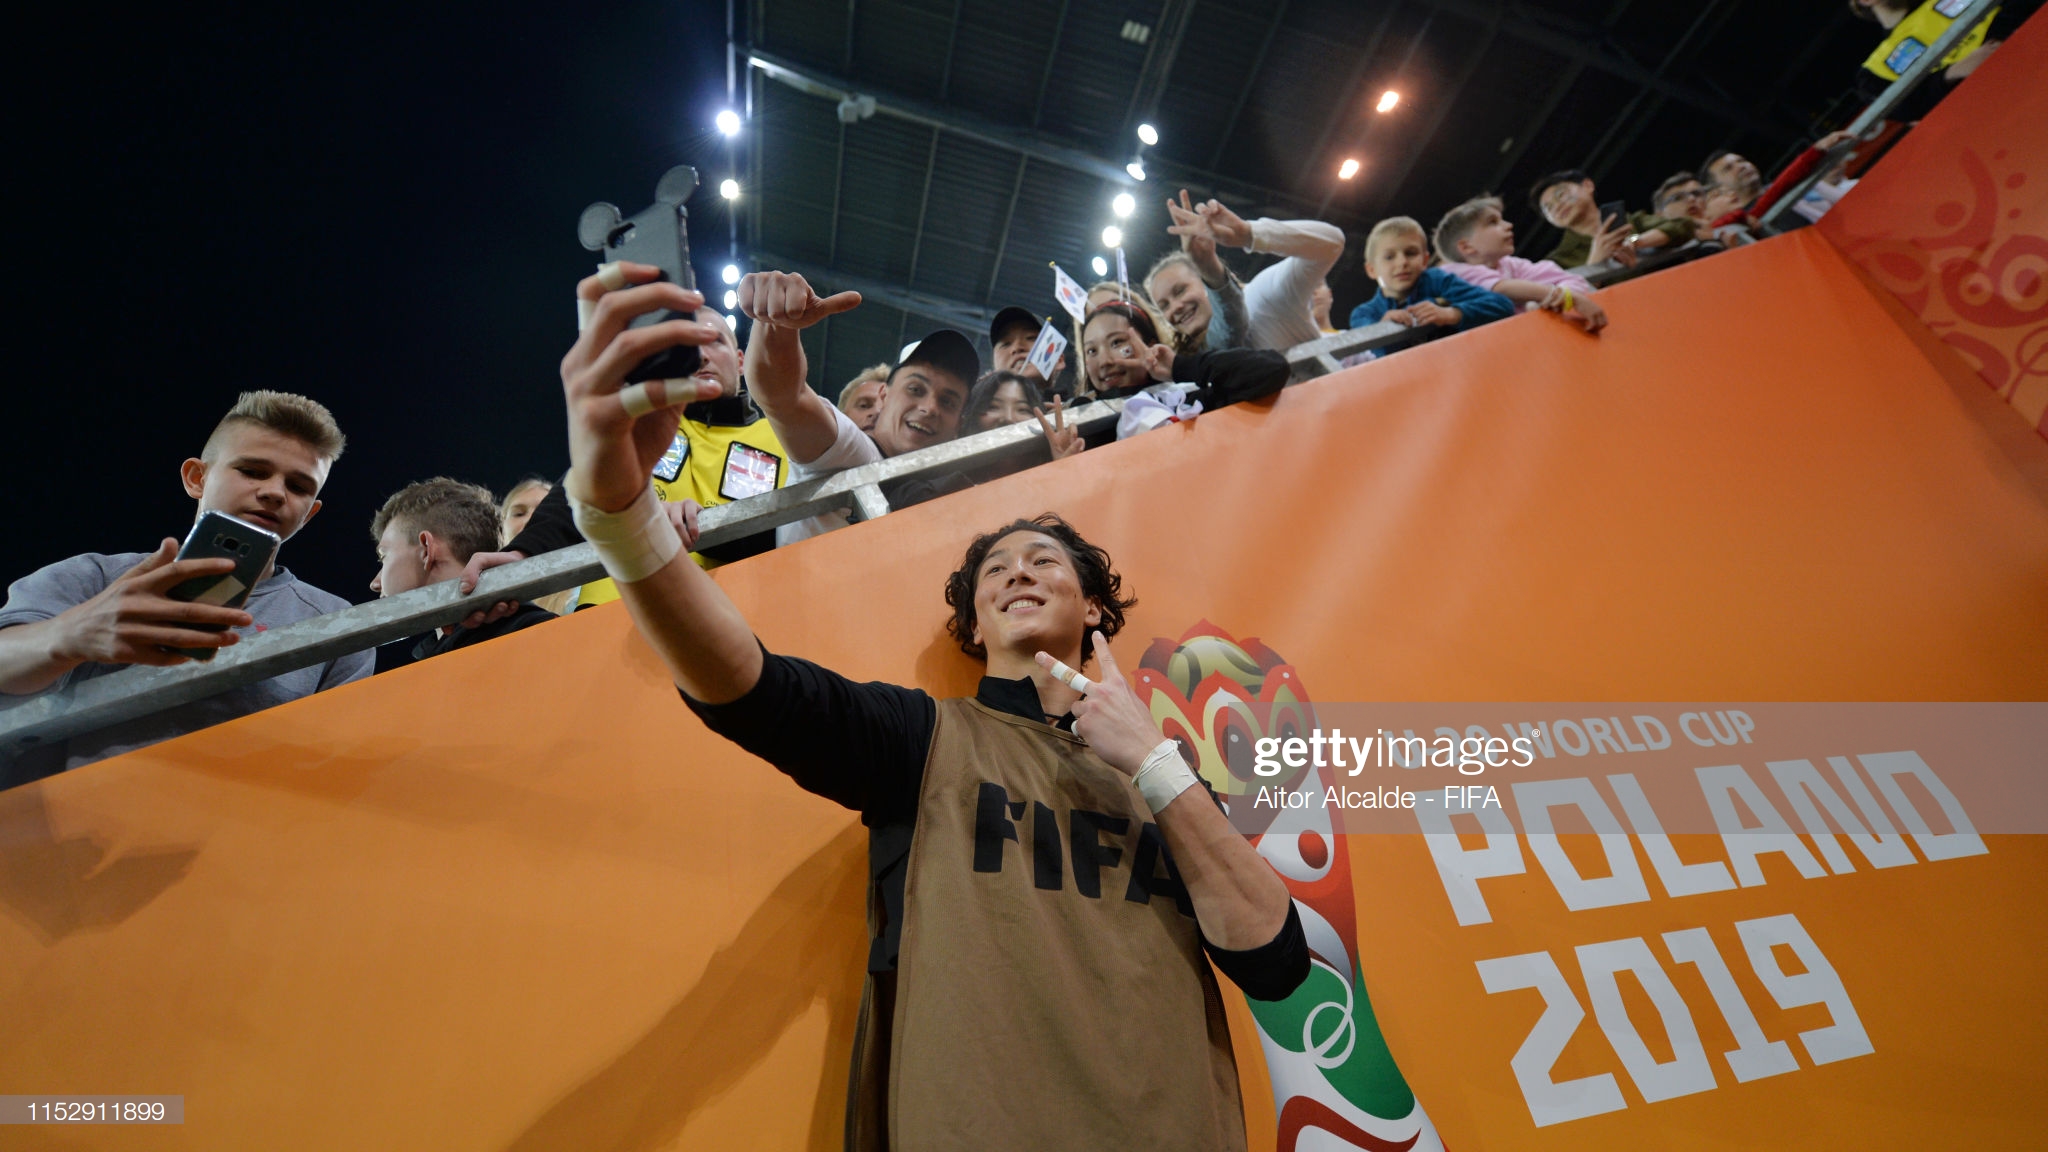 gettyimages-1152911899-2048x2048.jpg